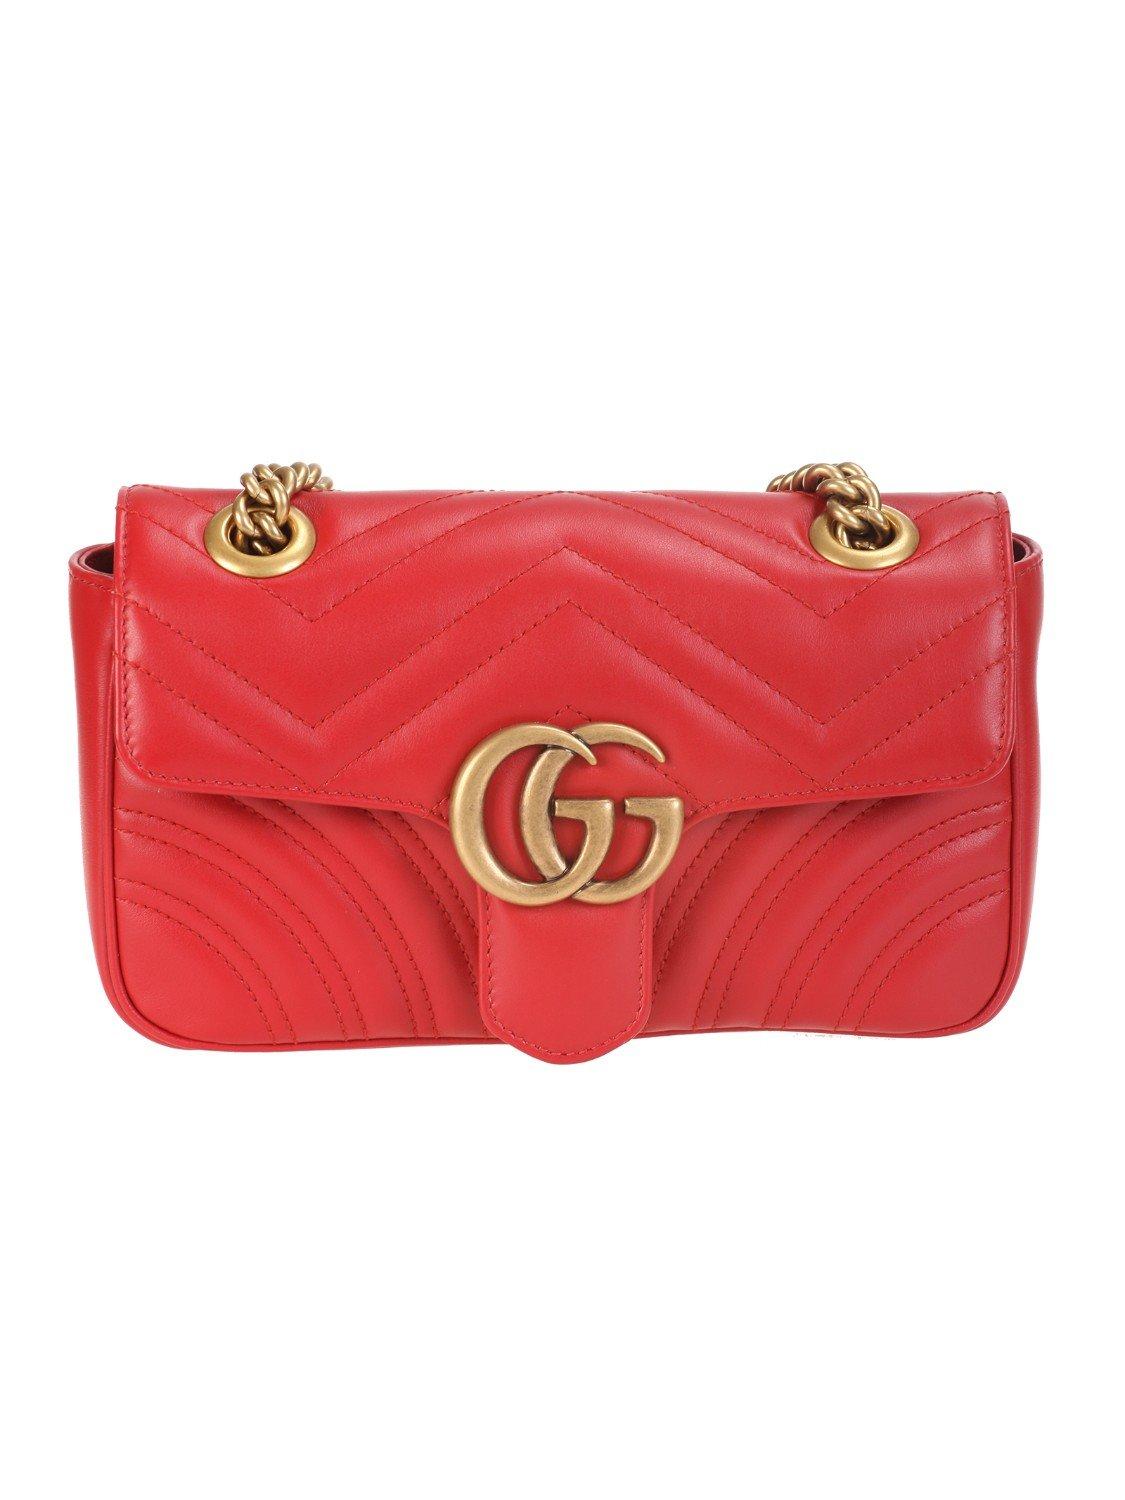 Gucci Marmont Small Shoulder Bag Size Chart | Paul Smith